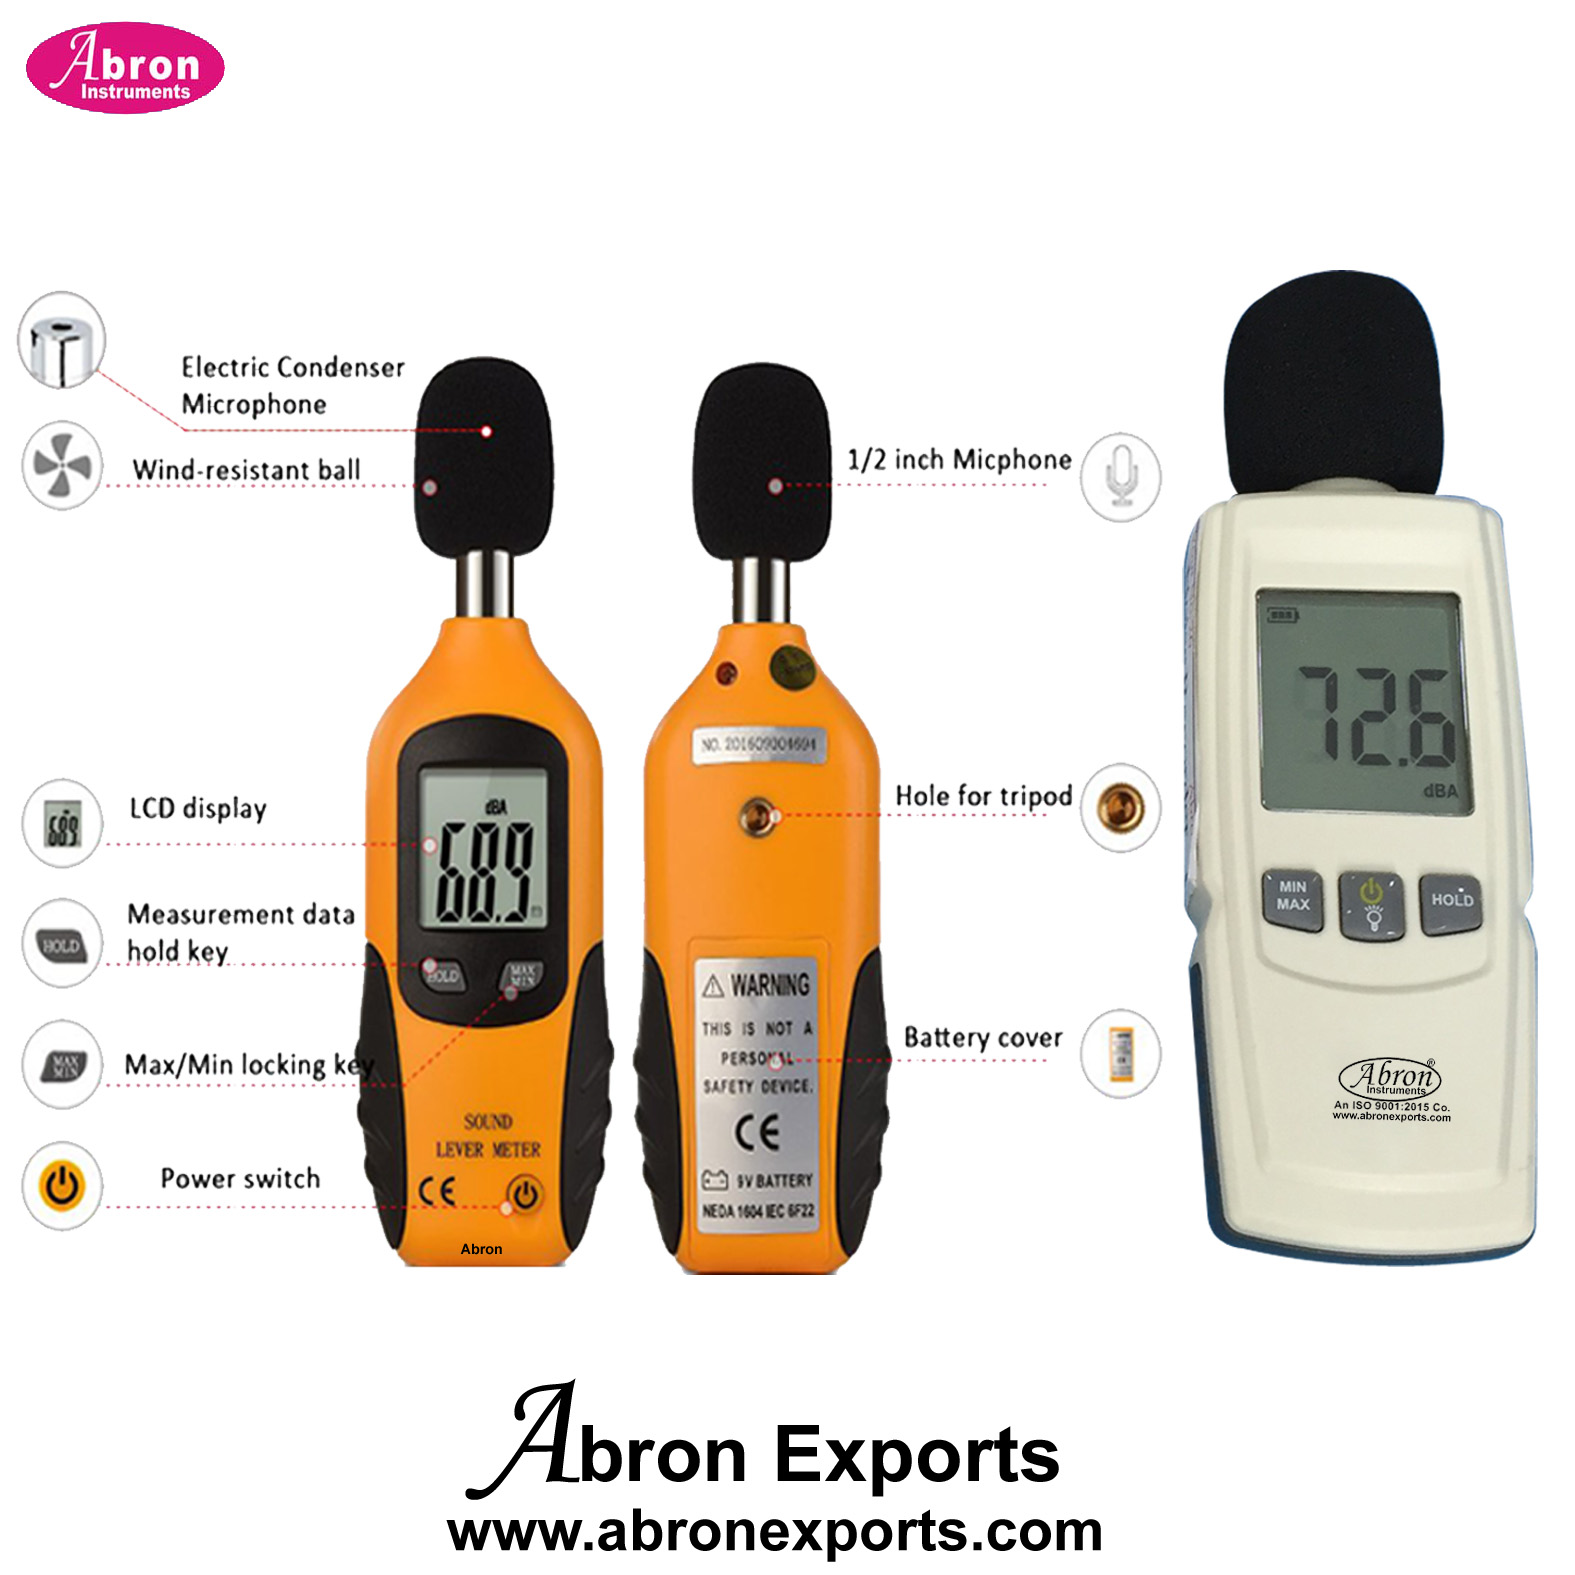 Sound Level Meter Digital LCD Audio noise measuring Range 30-130db with microphone portable Hold Max Min 9V battery AE-1328A